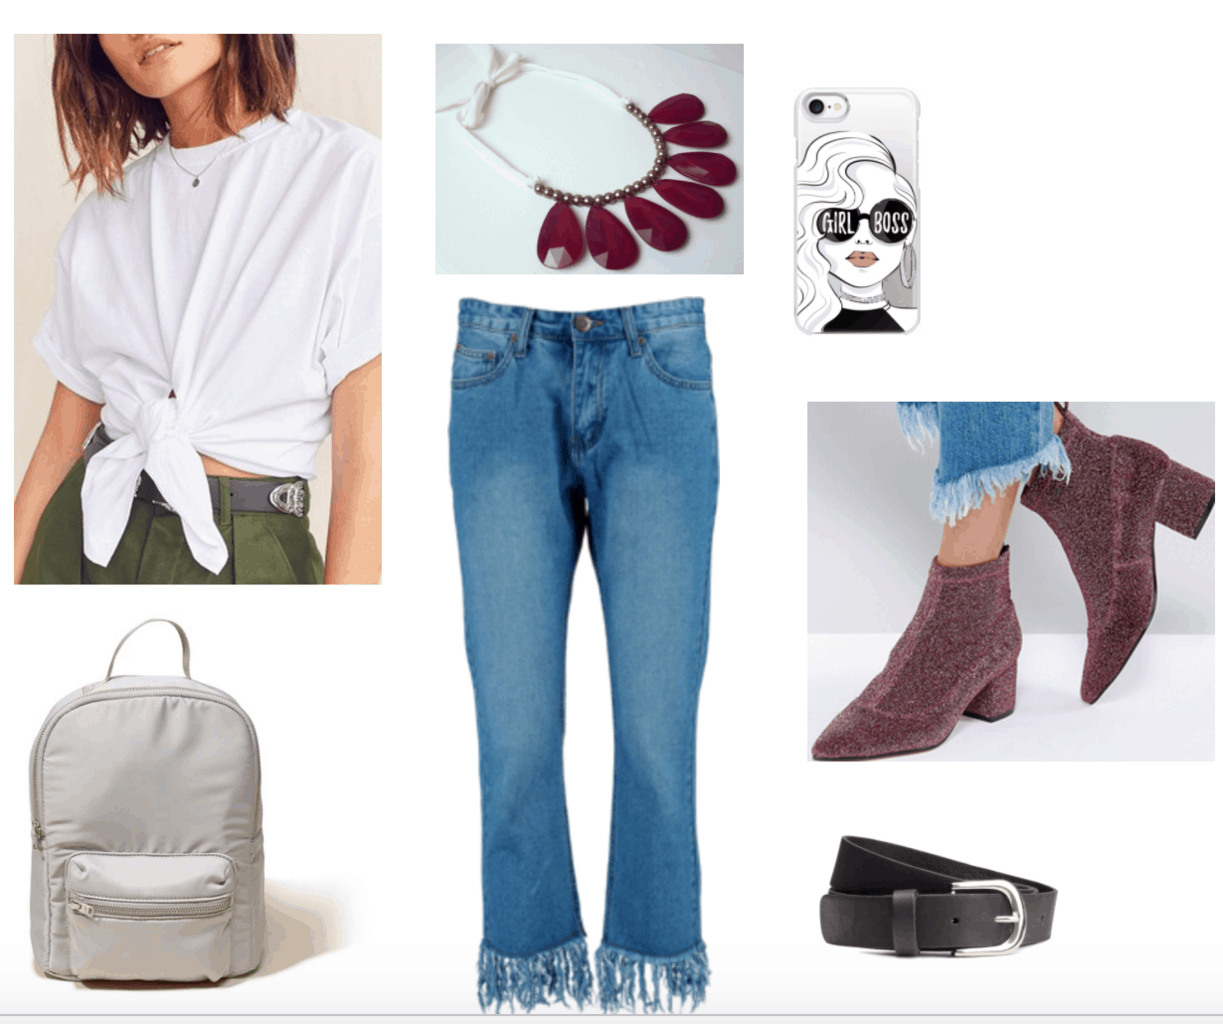 11 Sock Boot Outfits That Feel Fresh for the Season